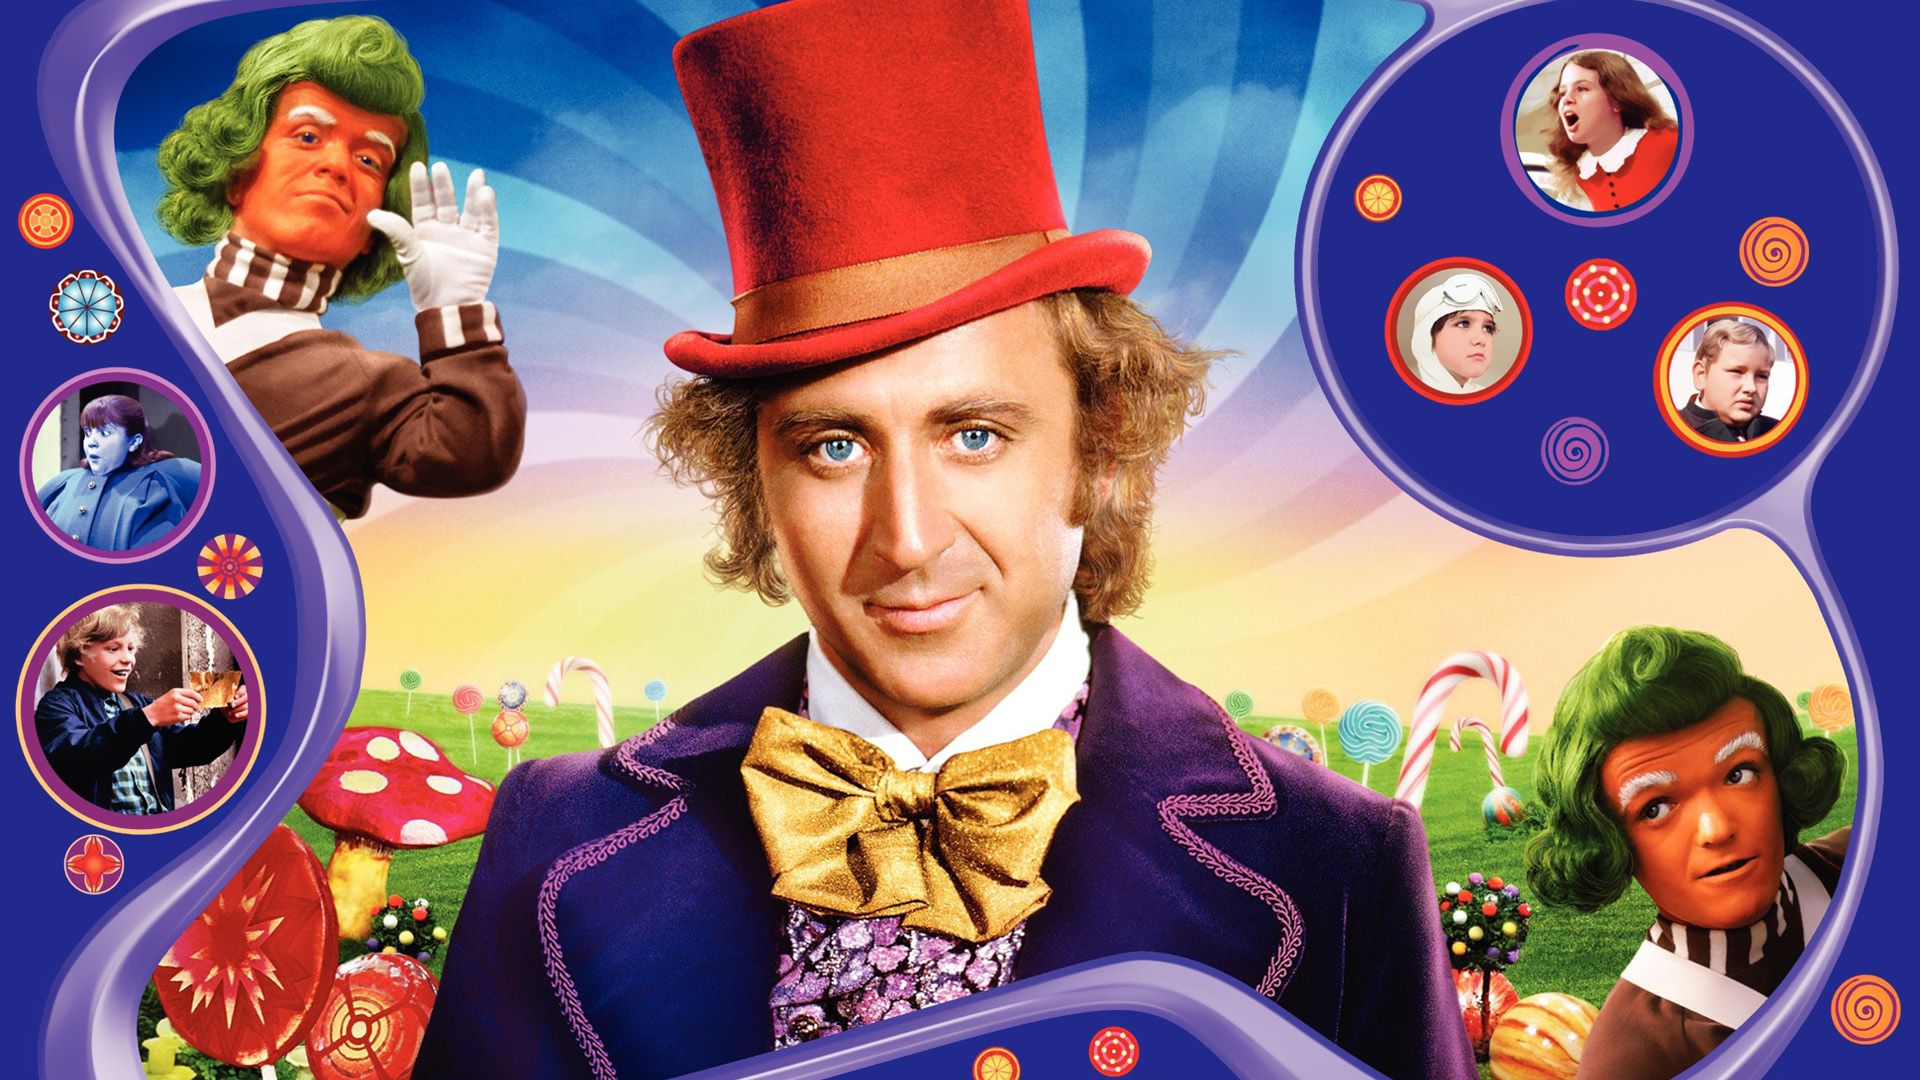 Willy Wonka & the Chocolate Factory background